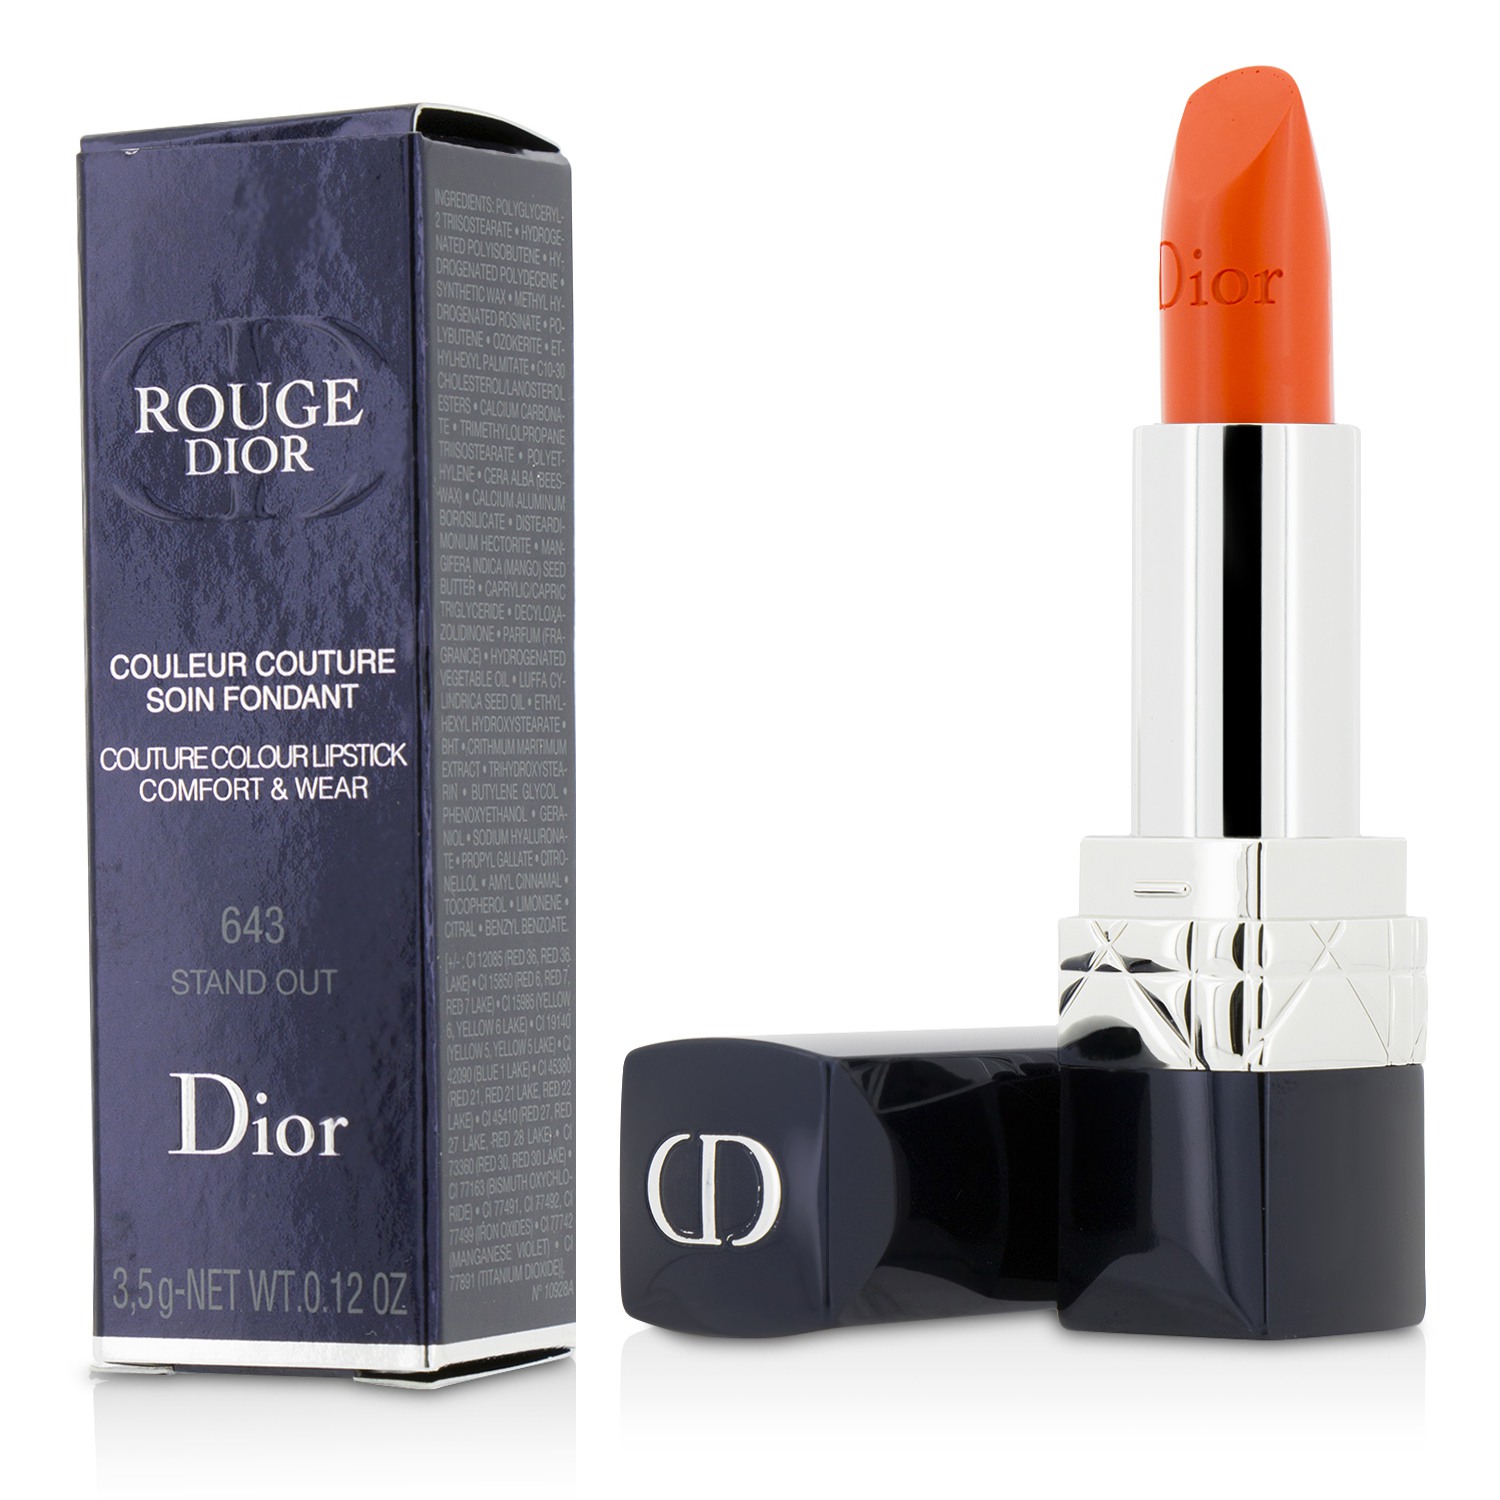 Rouge Dior Couture Colour Comfort & Wear Lipstick - # 643 Stand Out Christian Dior Image